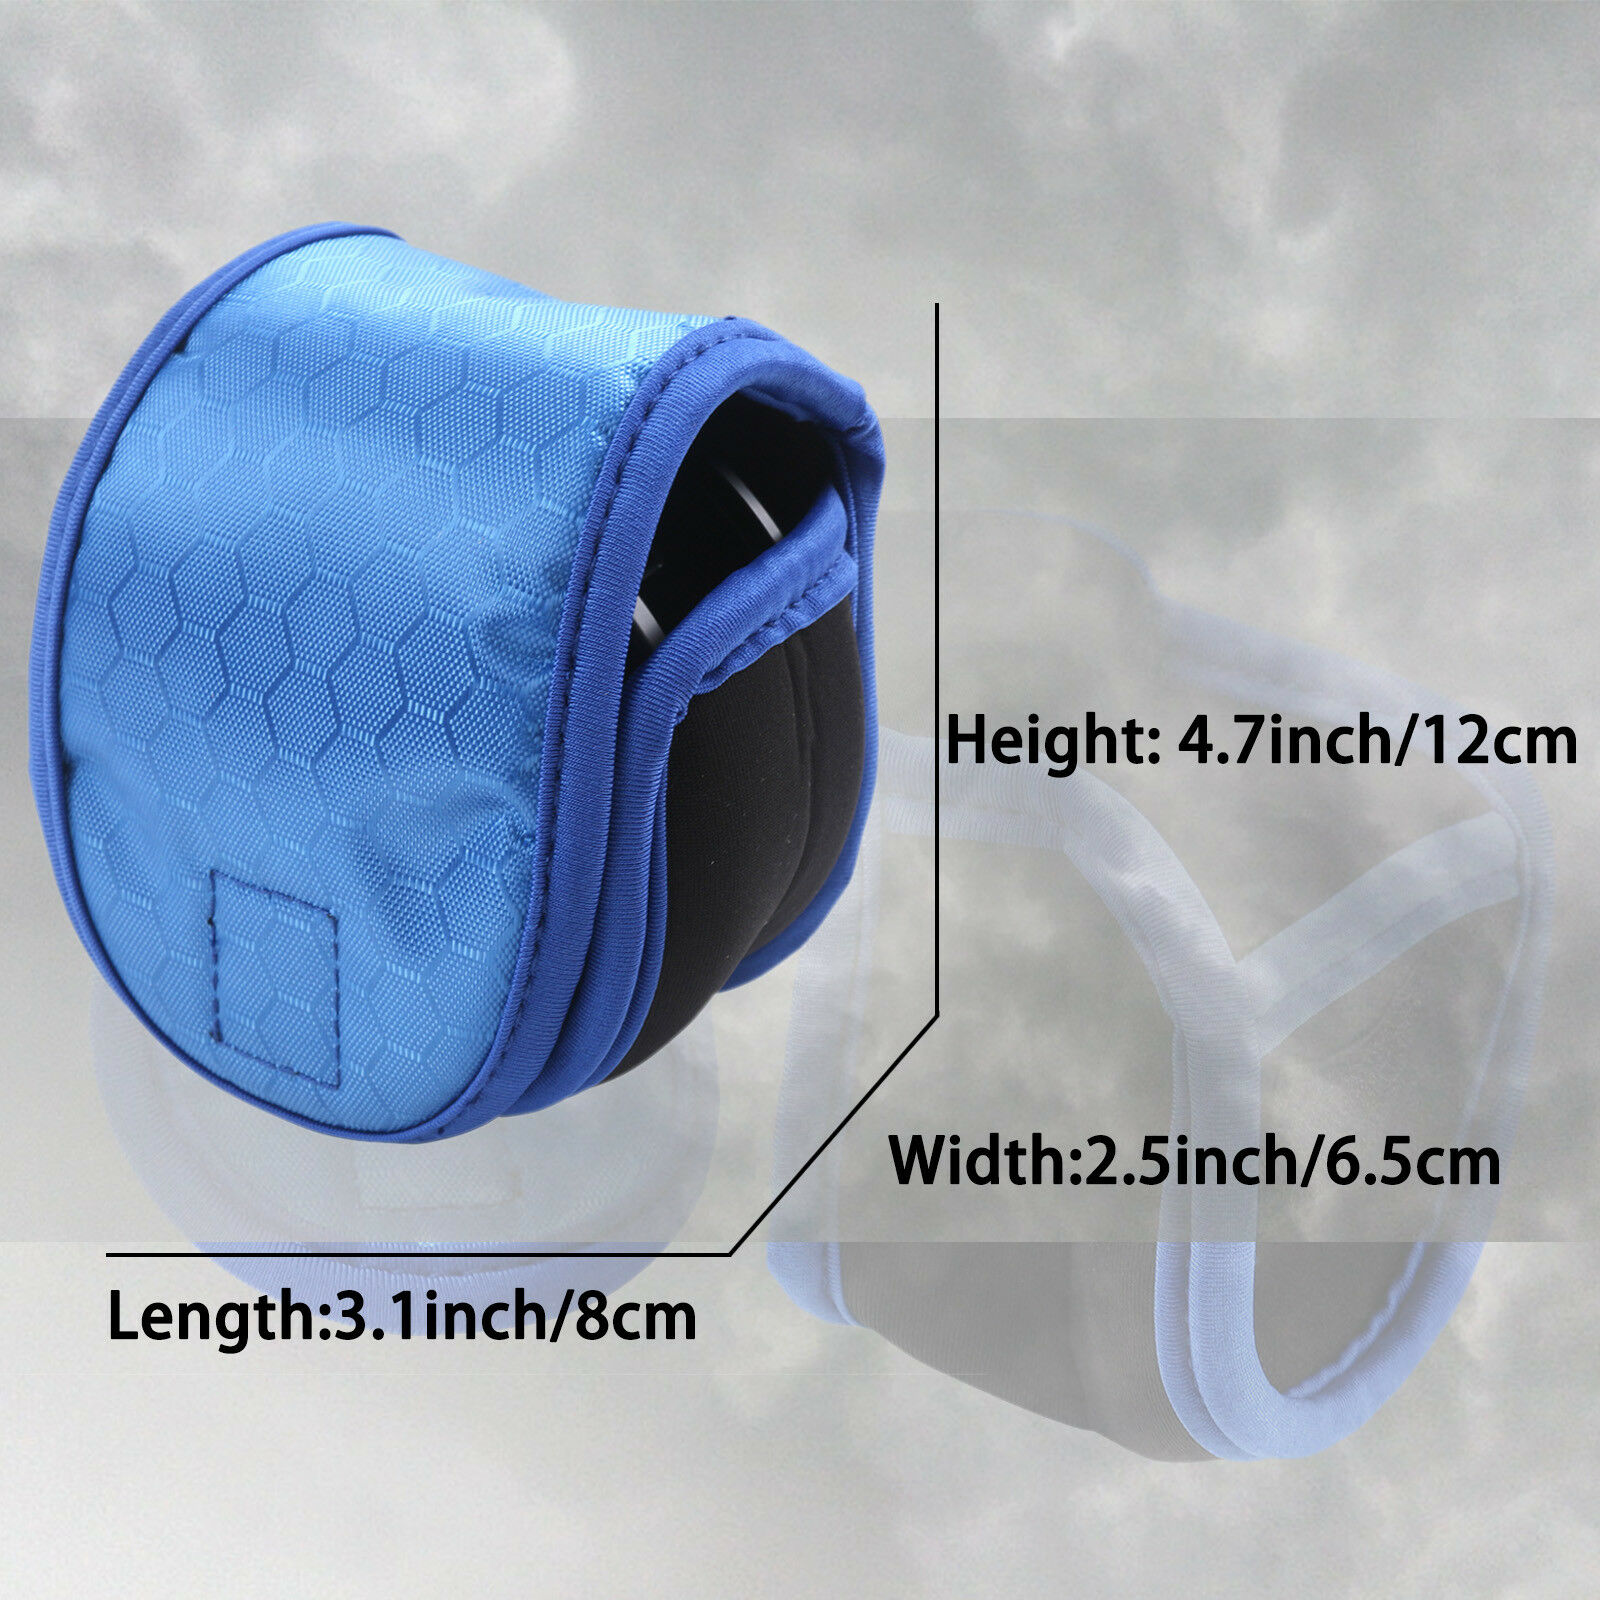 Maxcatch Fly Fishing Reel Pouch, Neoprene Conventional Fishing Reel Cover/Case